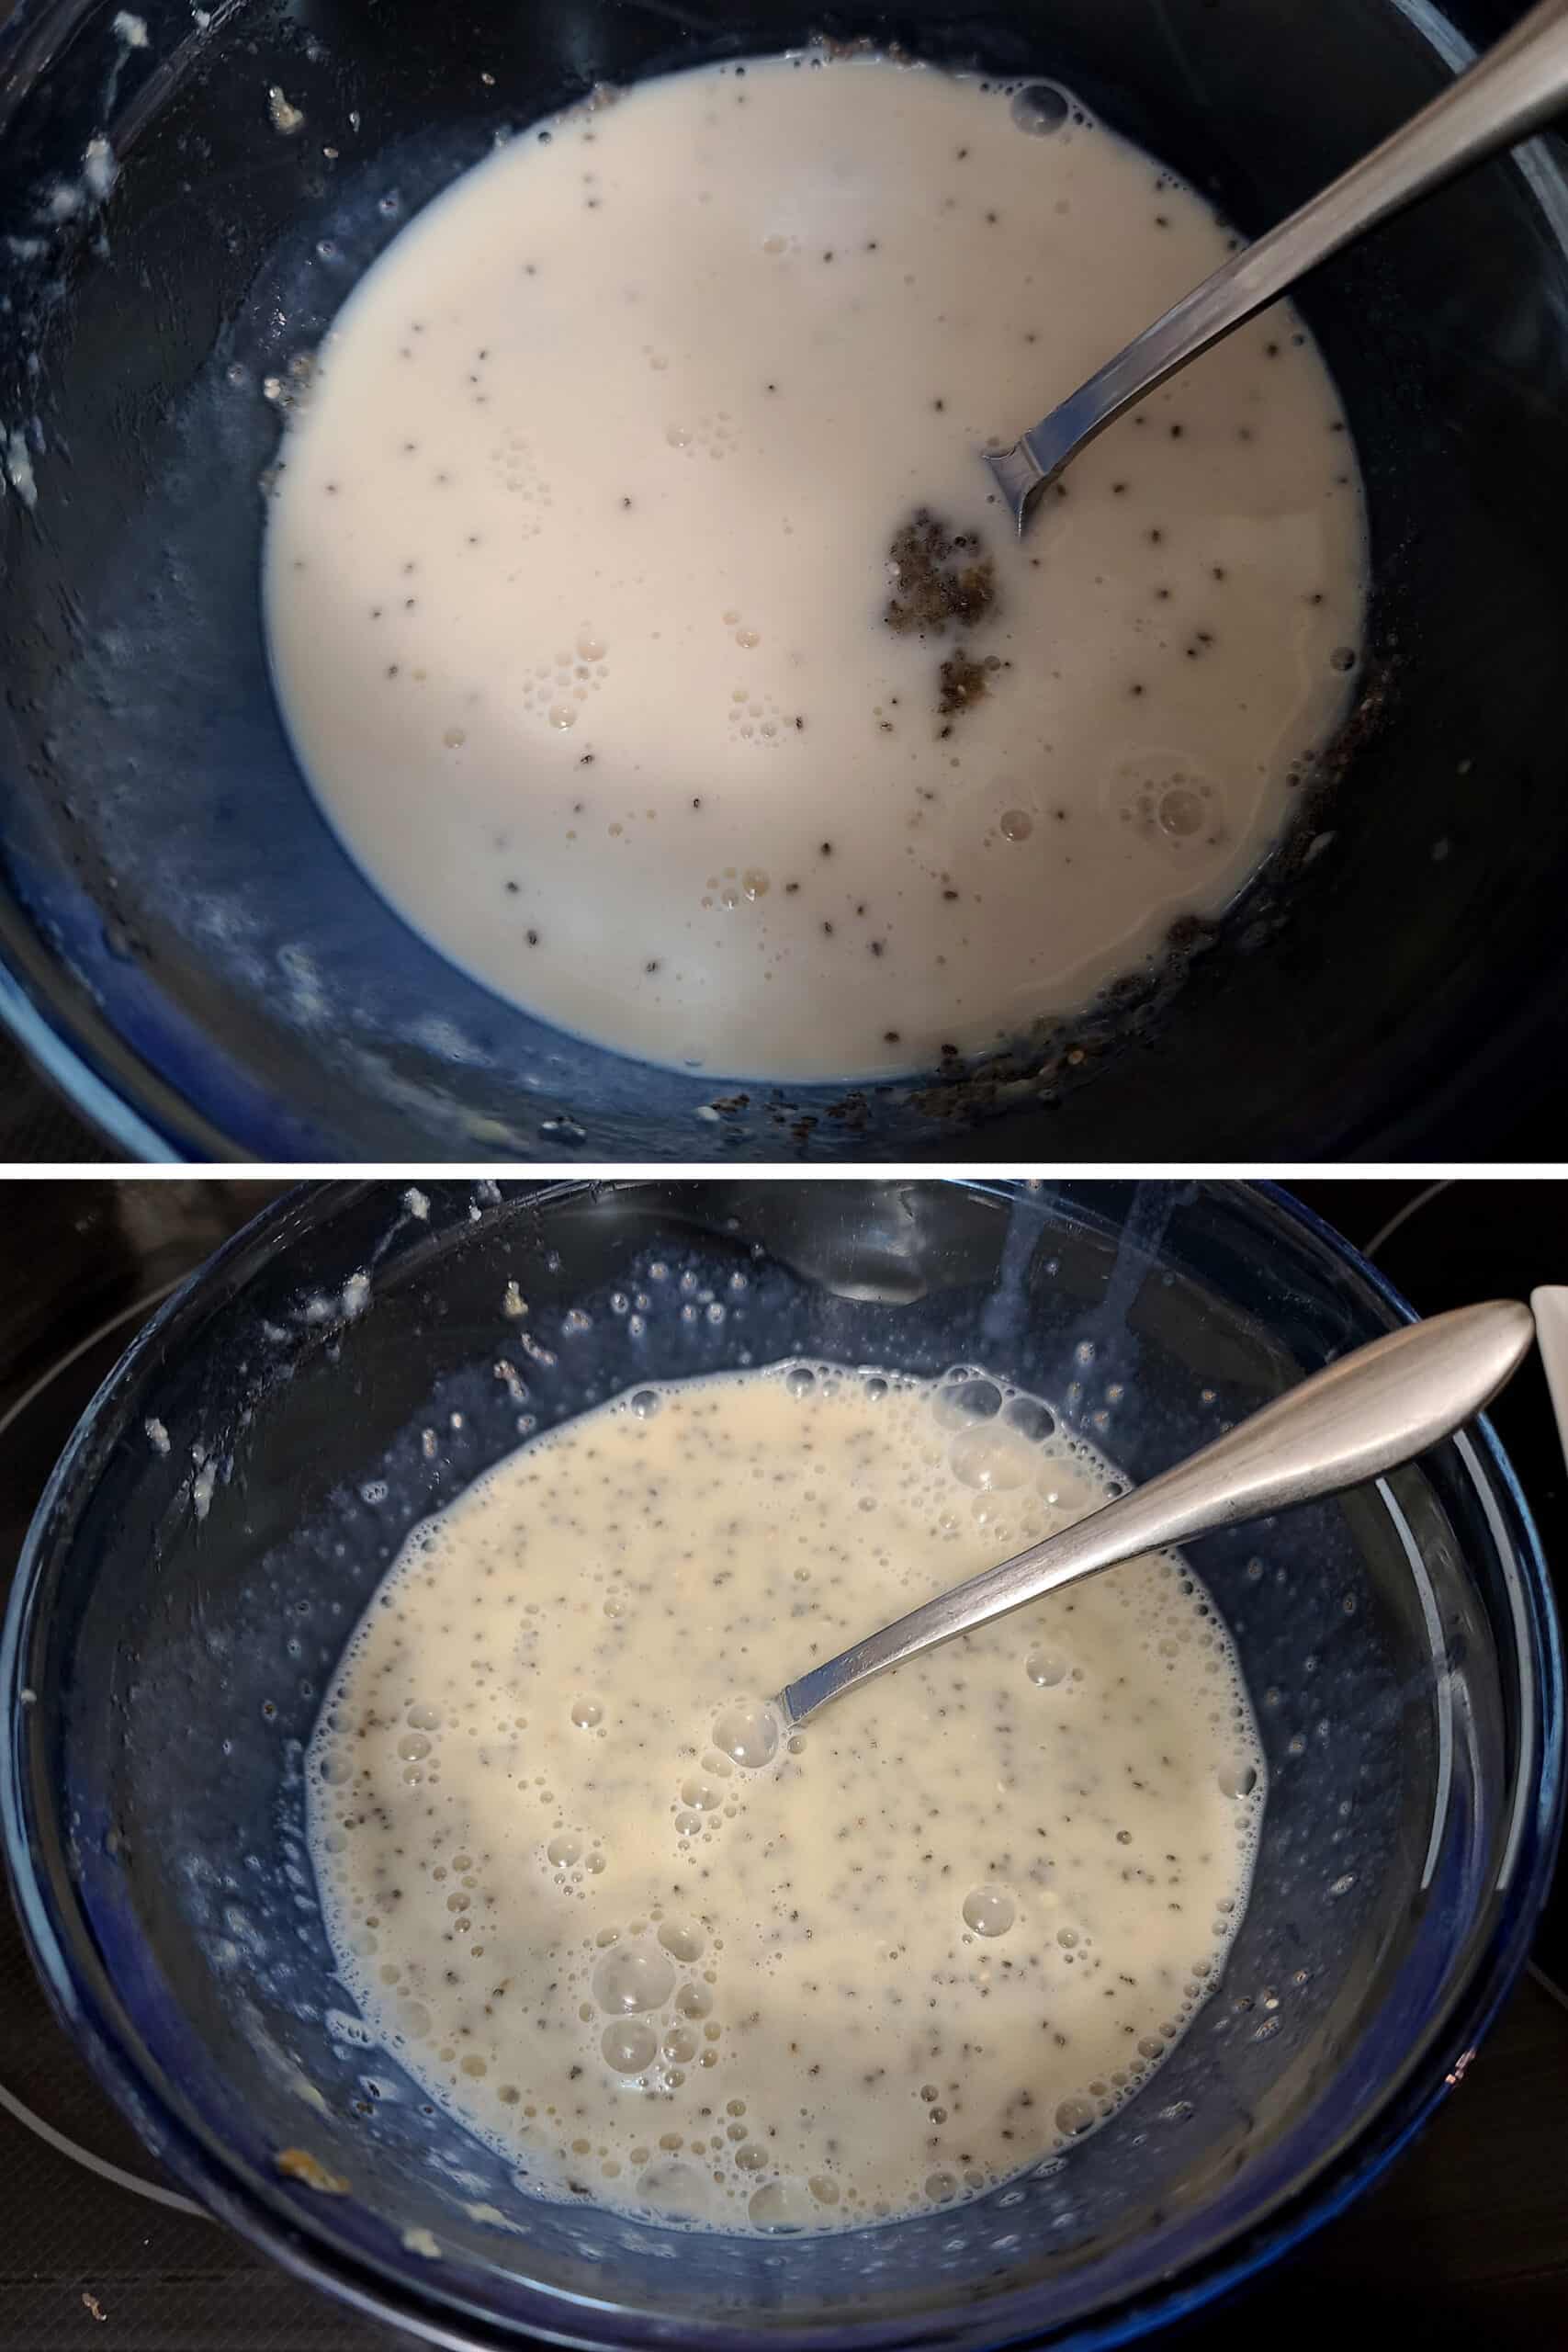 A 2 part image showing the milk being added to the bowl and mixed in.